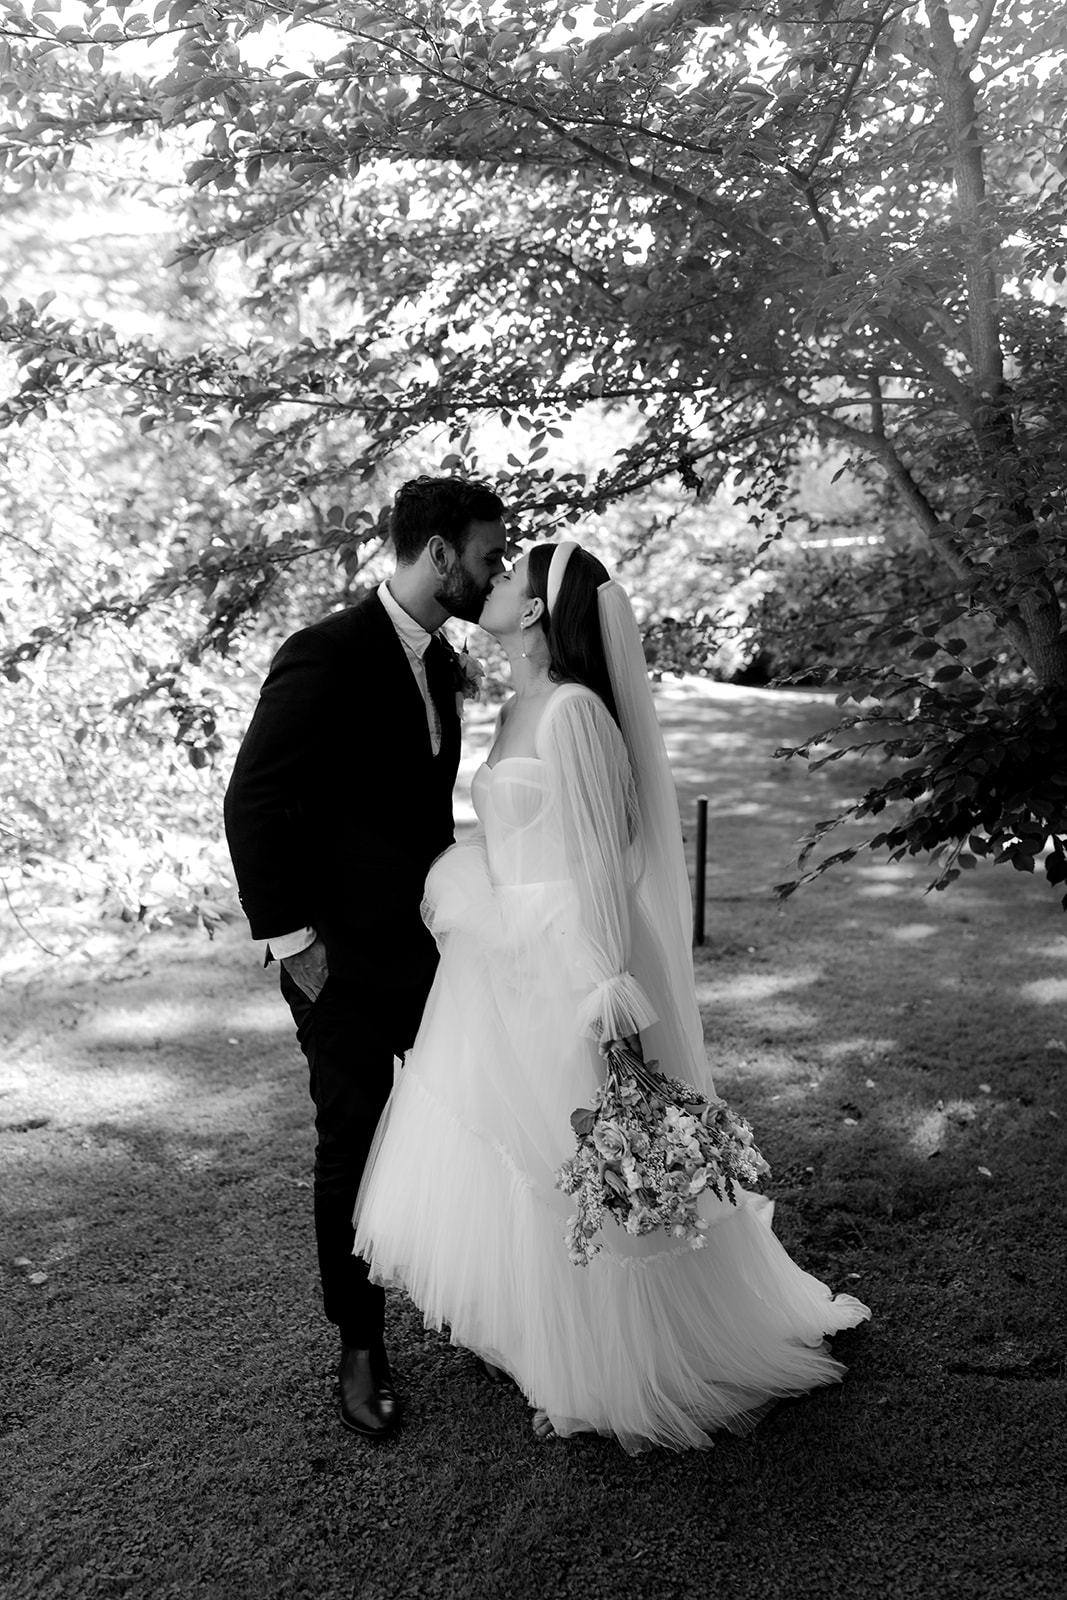 Portrait of bride & groom in an English-inspired garden during their elegant country wedding.